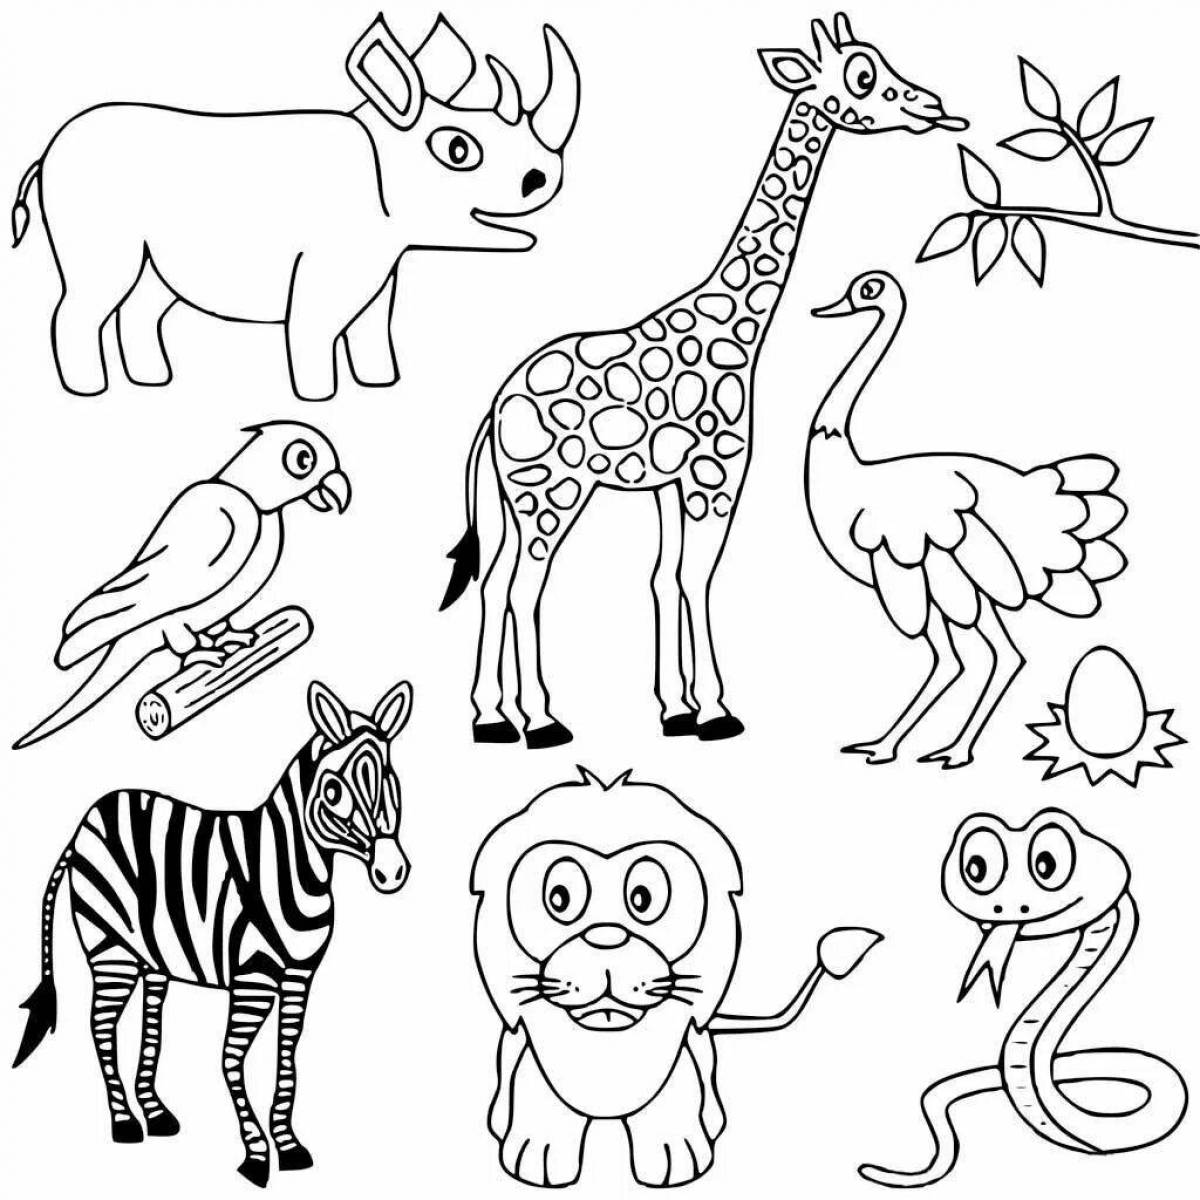 Crazy wild animal coloring pages for preschoolers